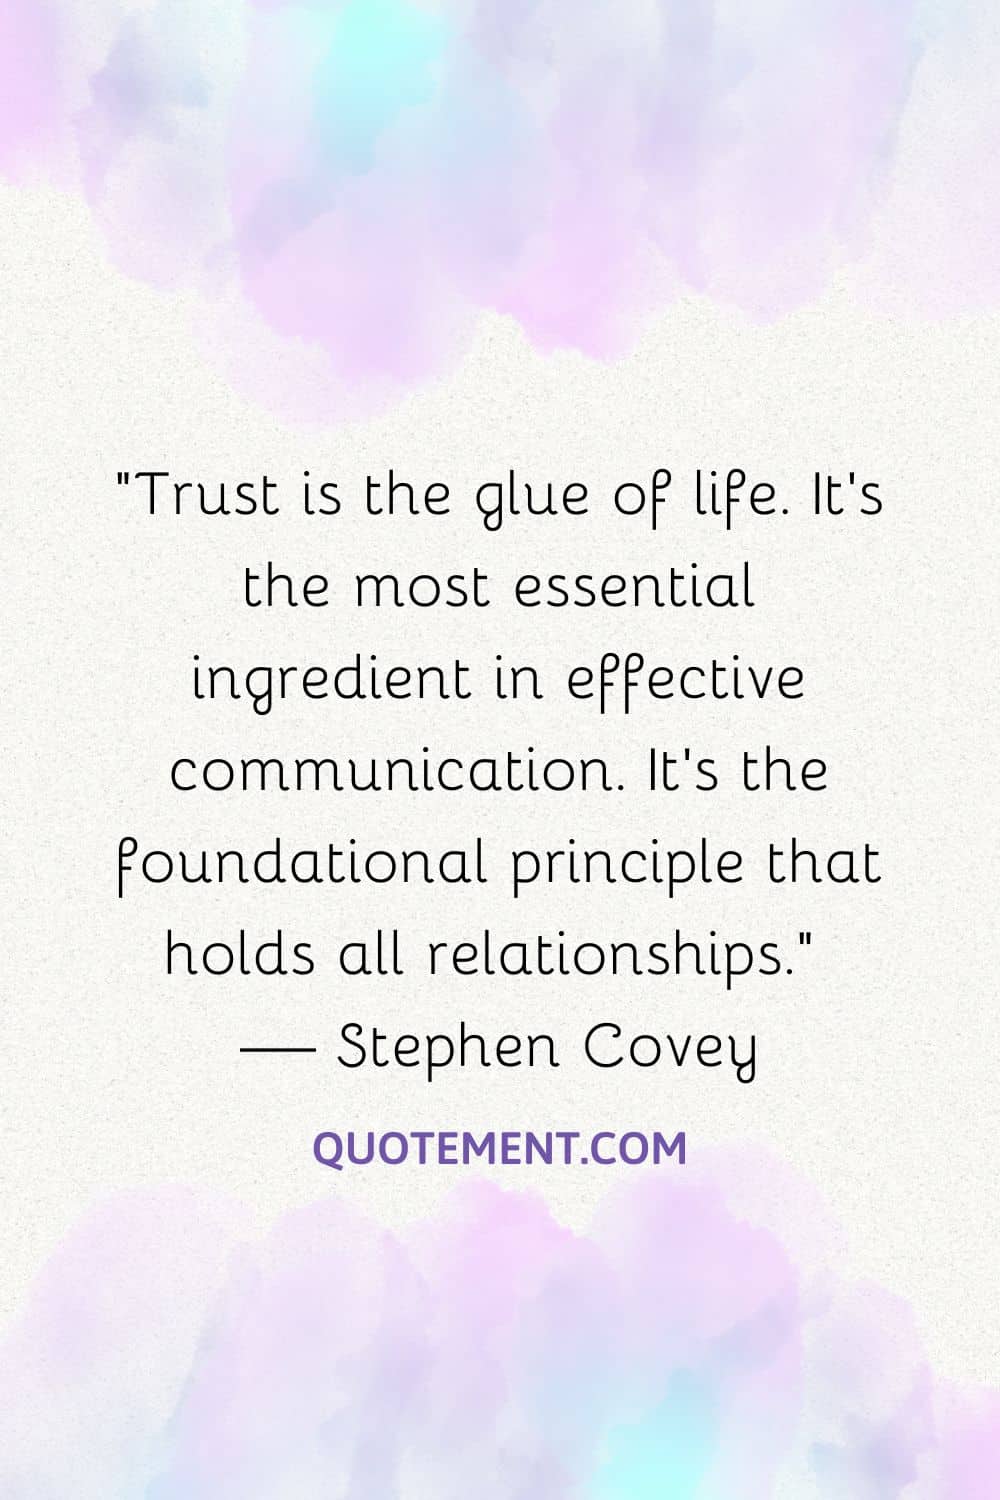 Trust is the glue of life